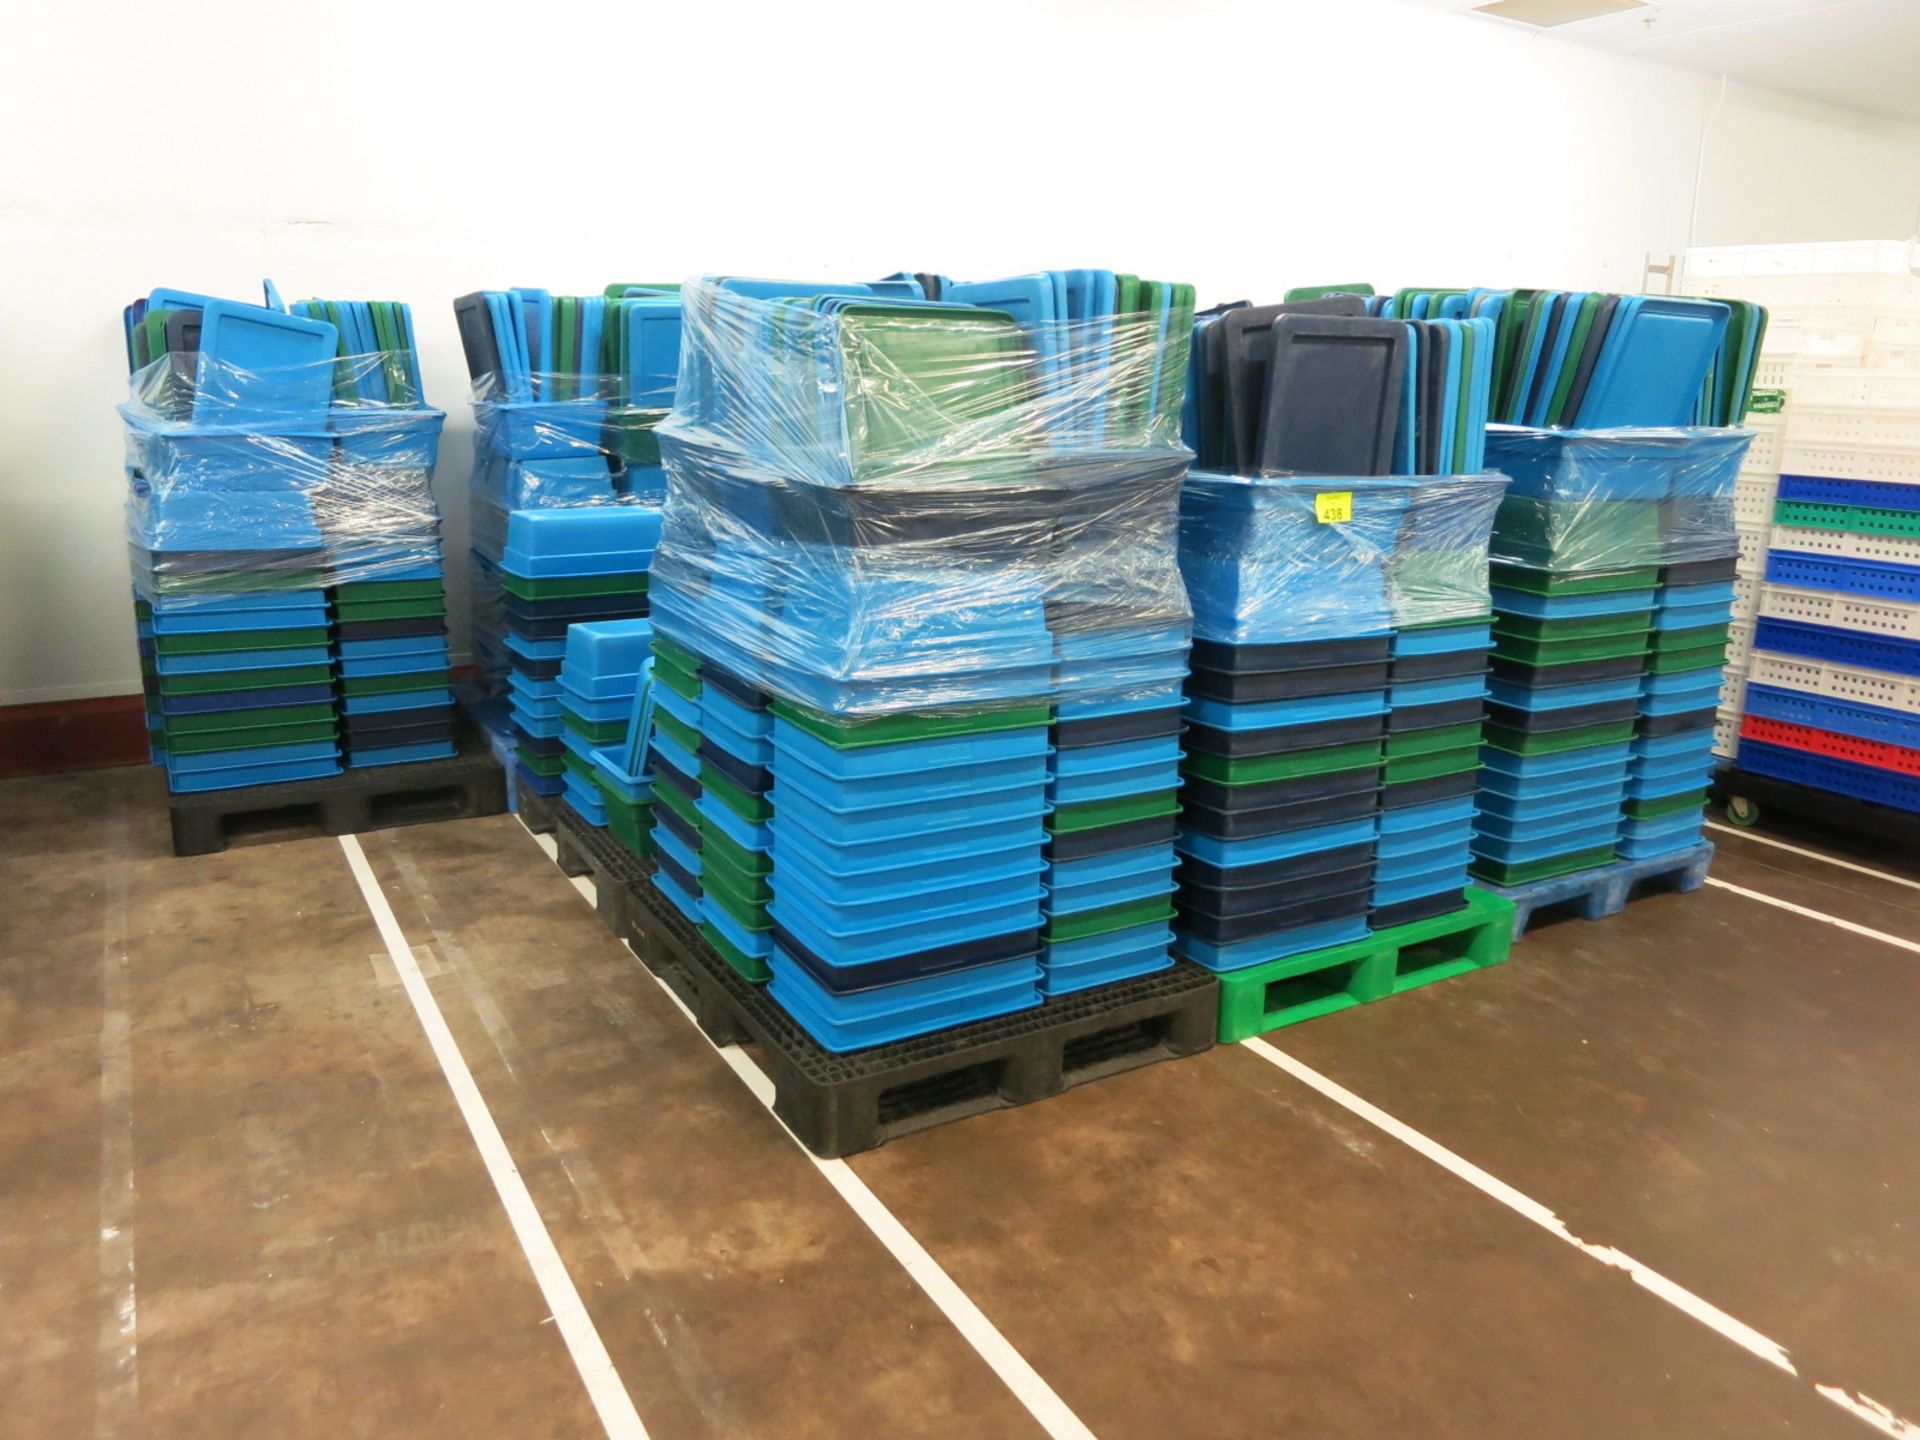 Blue and Green Bins - Image 2 of 2